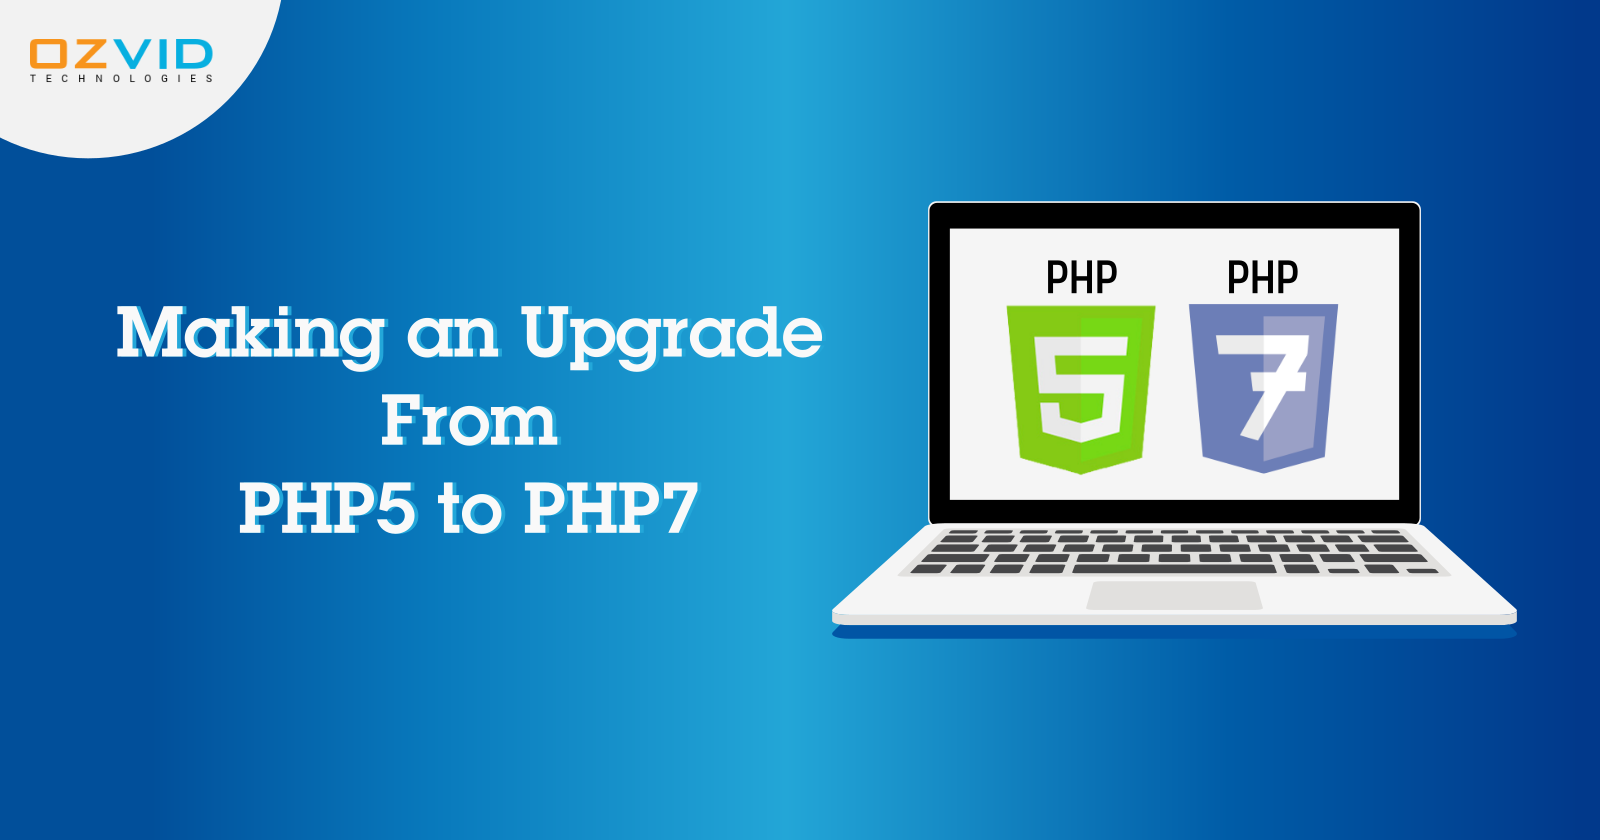 Have you upgraded from PHP 5 to PHP 7?